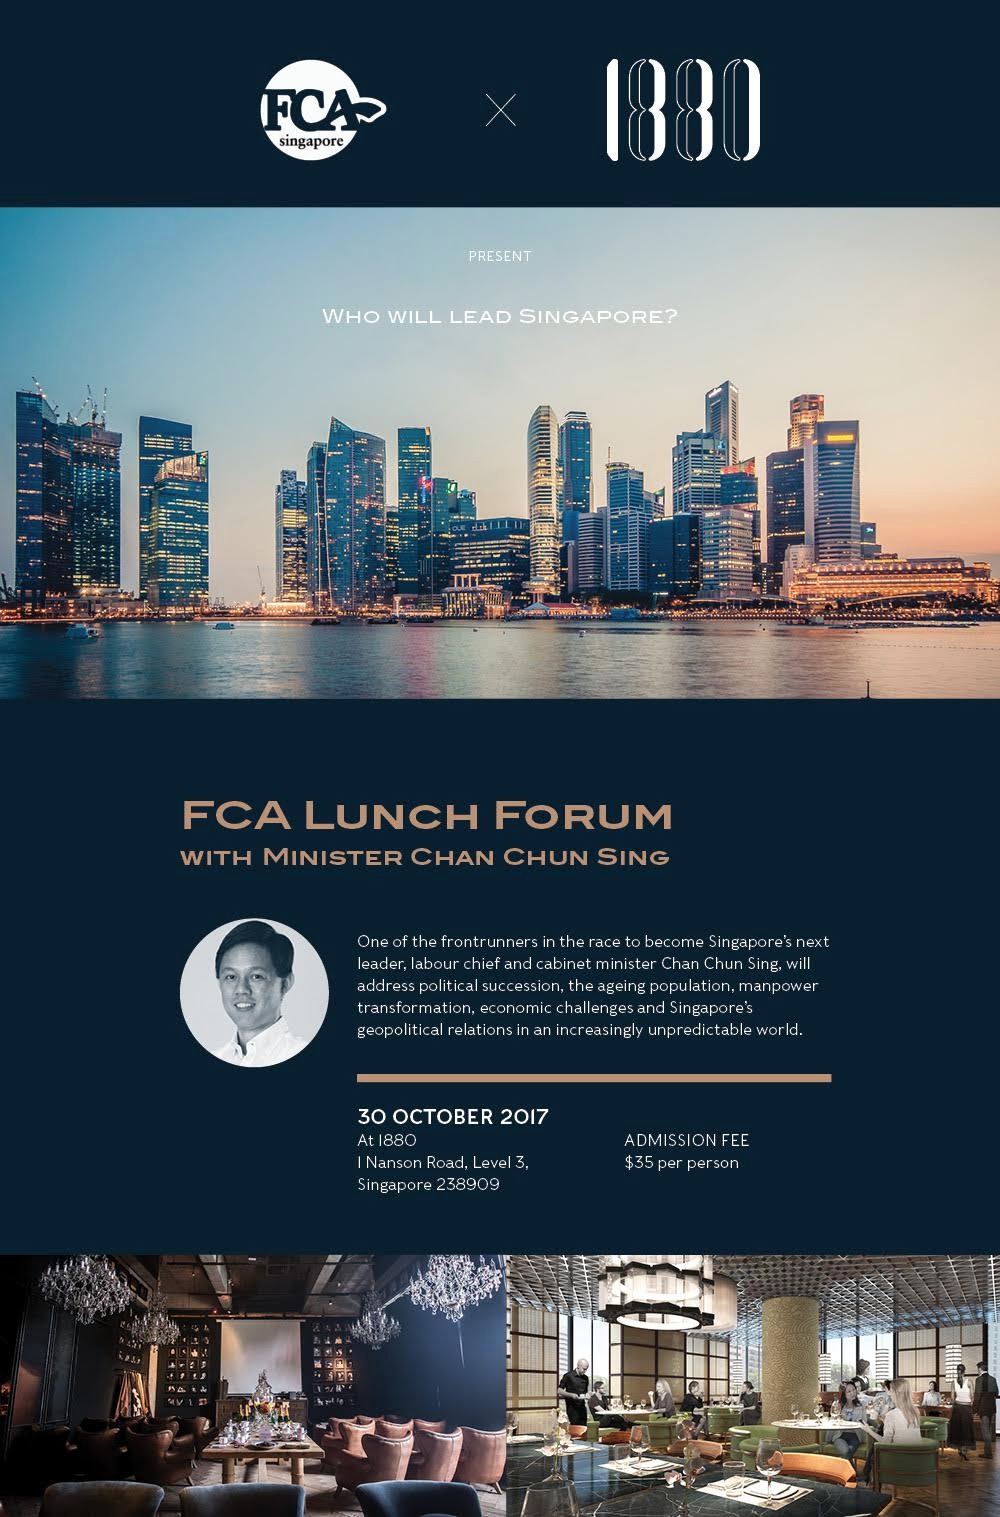 FCA lunch forum with Minister Chan Chun Sing